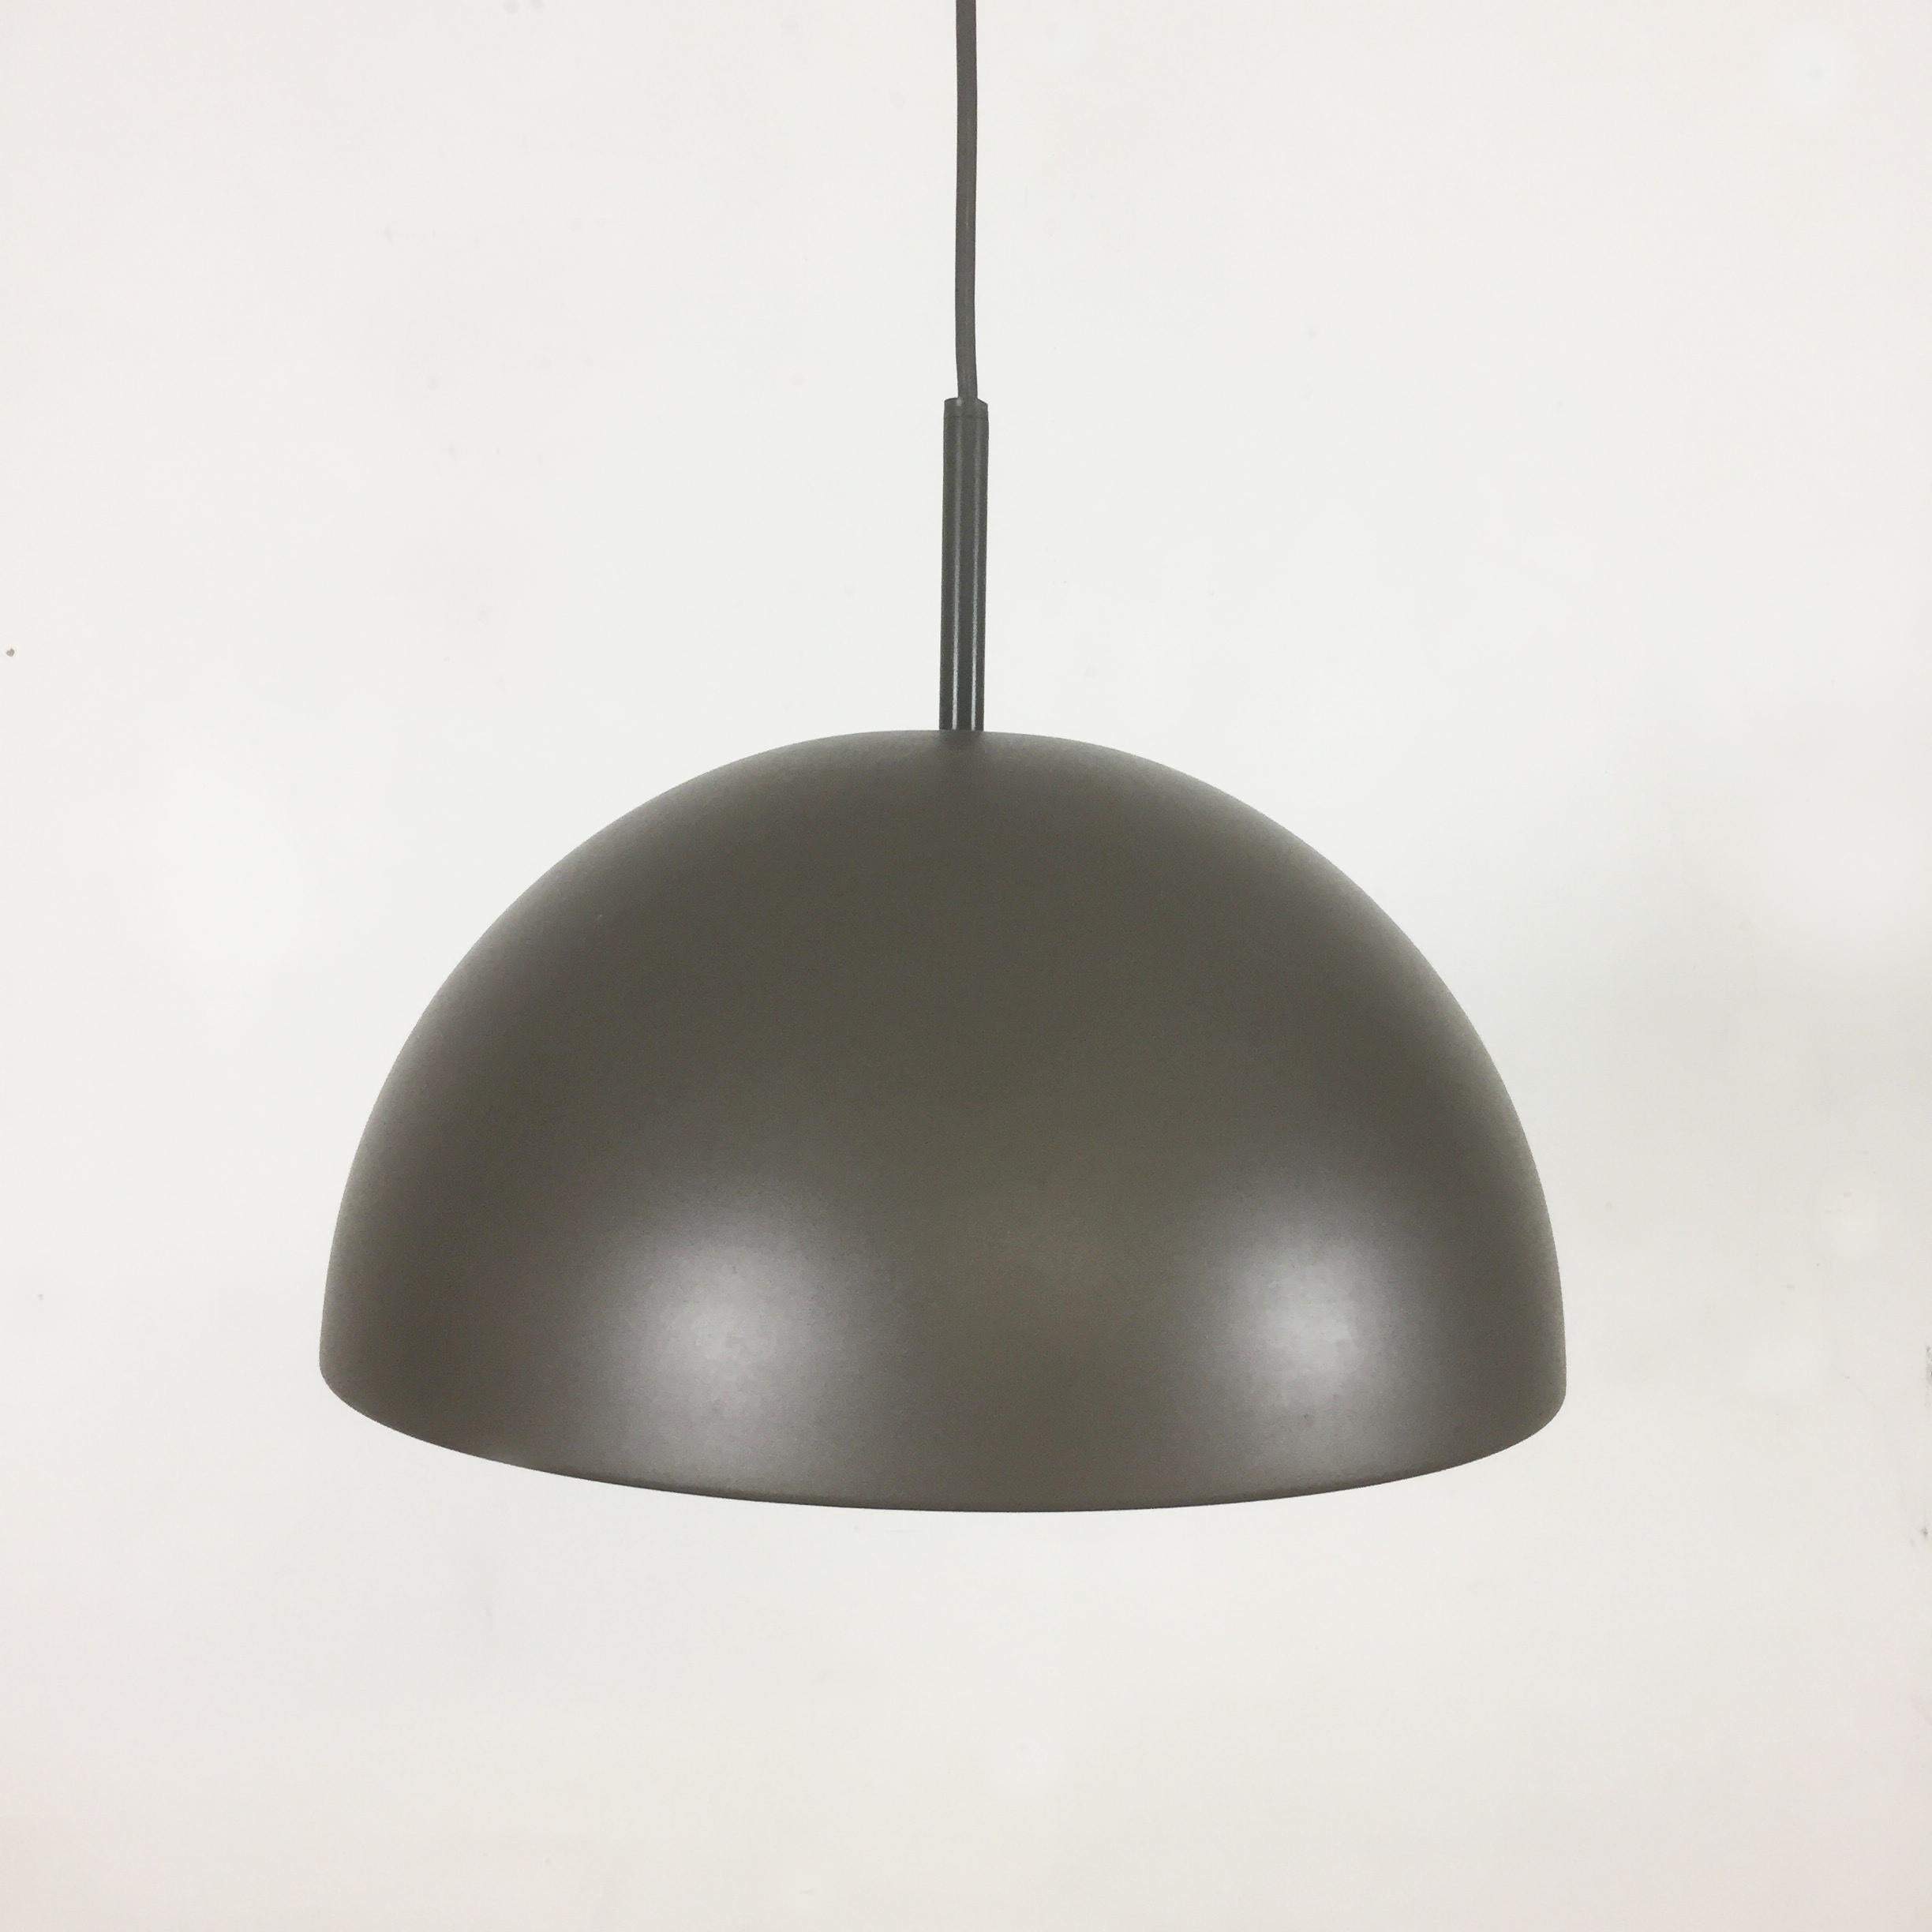 Article:

Bubble hanging light



Producer: 

Staff Lights, Germany


Design:

Rolf Krüger


Origin: 

Germany


Age: 

1970s



Description: 

This hanging light was designed by Rolf Krüger in the 1970s and produced by Staff Light in Germany in the